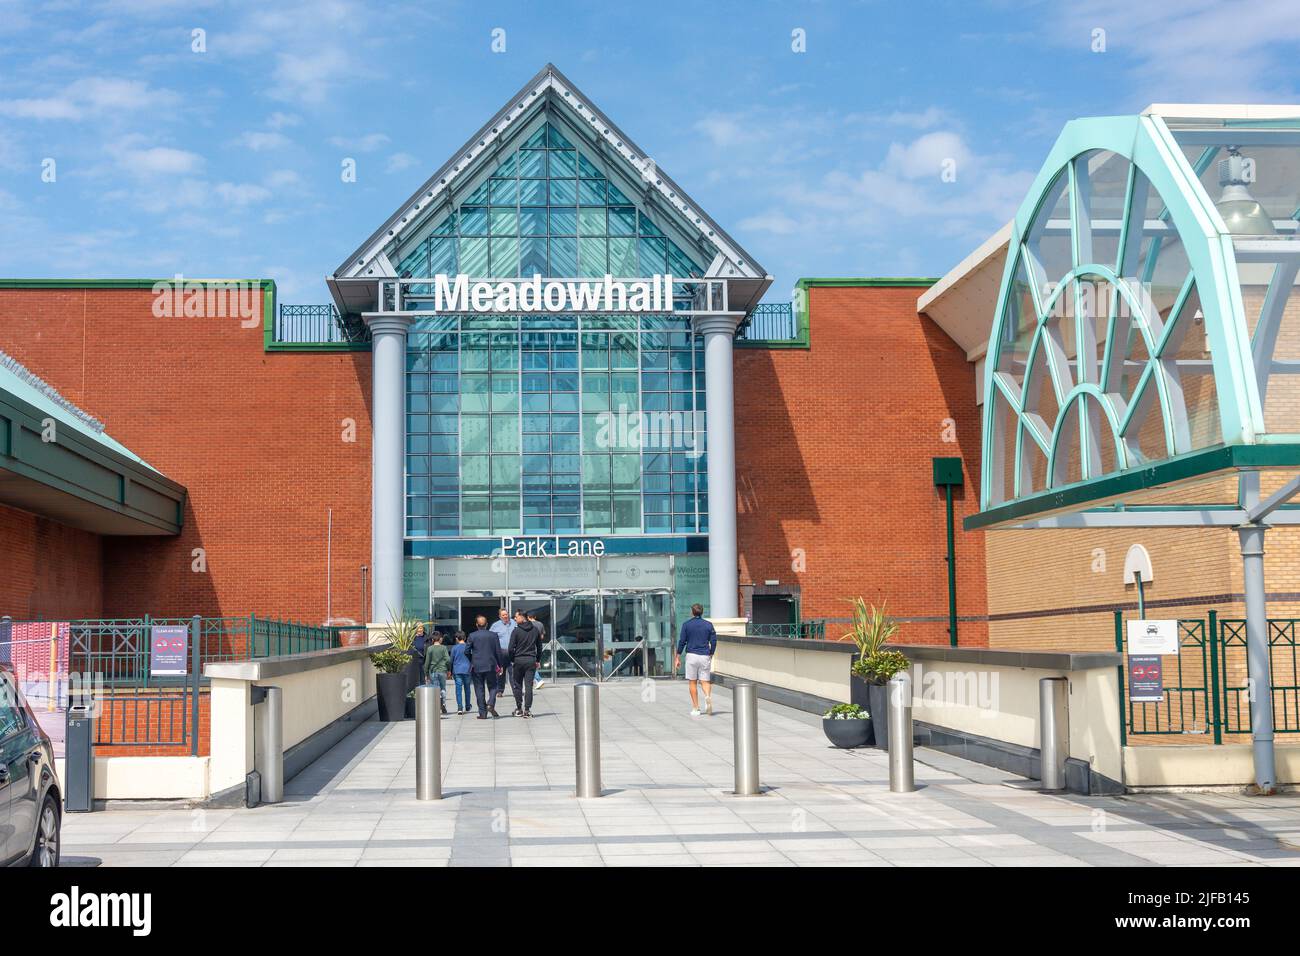 Eingang Park Lane, Meadowhall Shopping Centre, Meadowhall, Sheffield, South Yorkshire, England, Vereinigtes Königreich Stockfoto